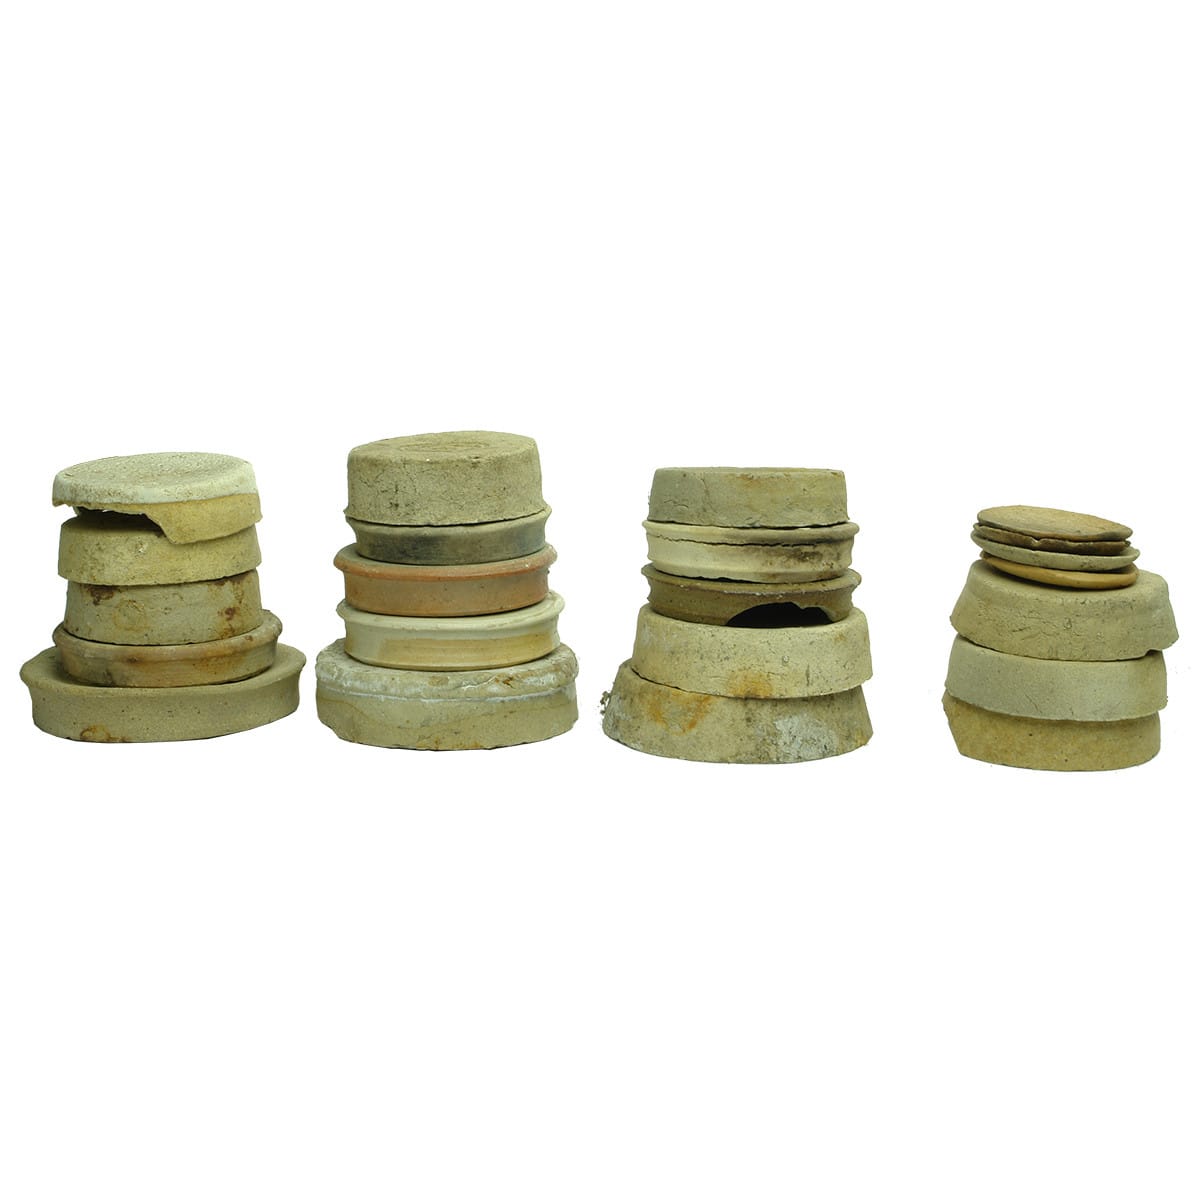 22 Items: 18 Chinese jar lids and 4 sealing inserts for chinese jars.